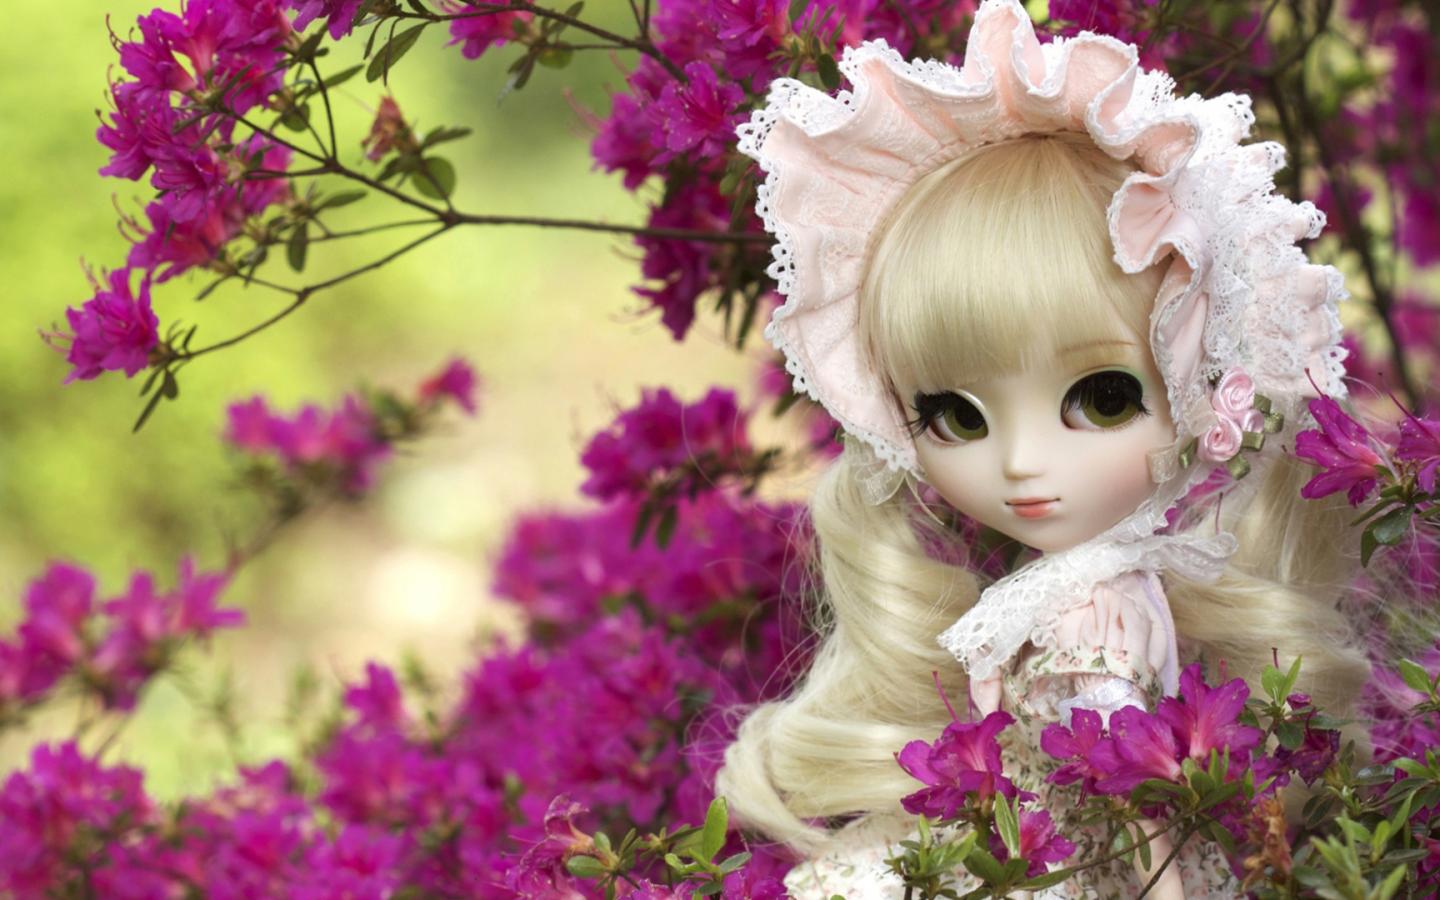 Picture of Flower and Cute Doll for Girly Wallpaper Wallpaper. Wallpaper Download. High Resolution Wallpaper